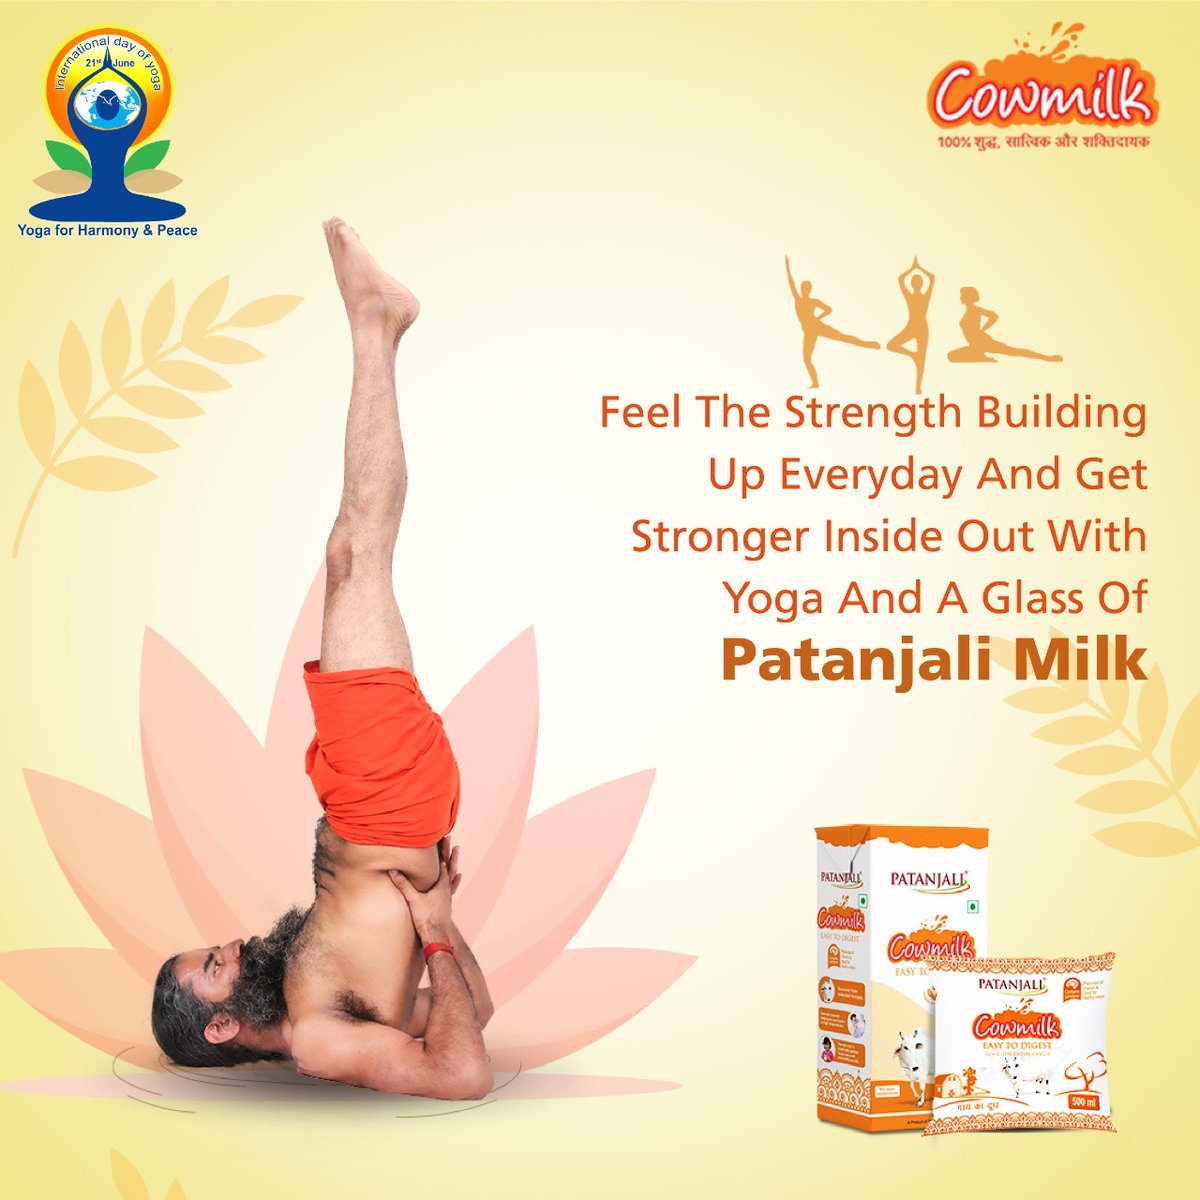 Make your body and immune system strong with the power of Yoga and a glass of Patanjali Milk everyday!
#yogaday2022 #patanjalidairy #patanjalidairyprducts